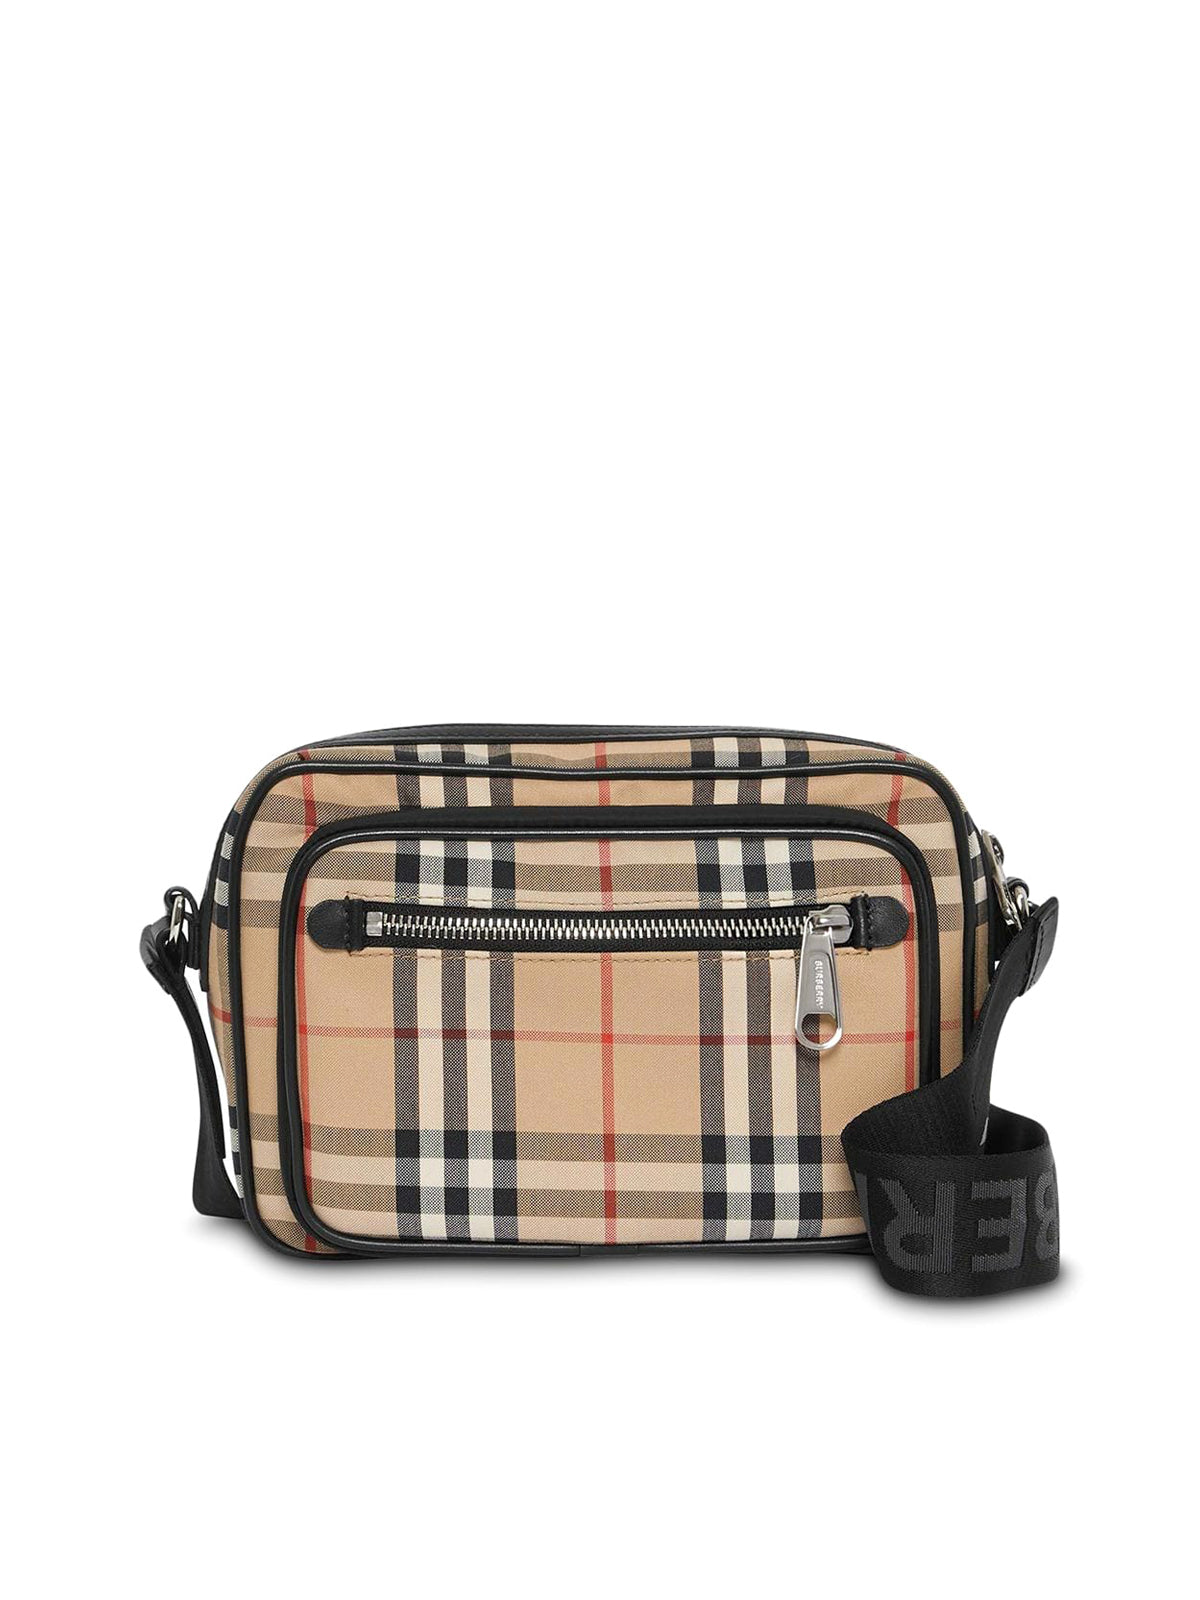 BURBERRY VINTAGE CHECK AND LEATHER CROSSBODY BAG